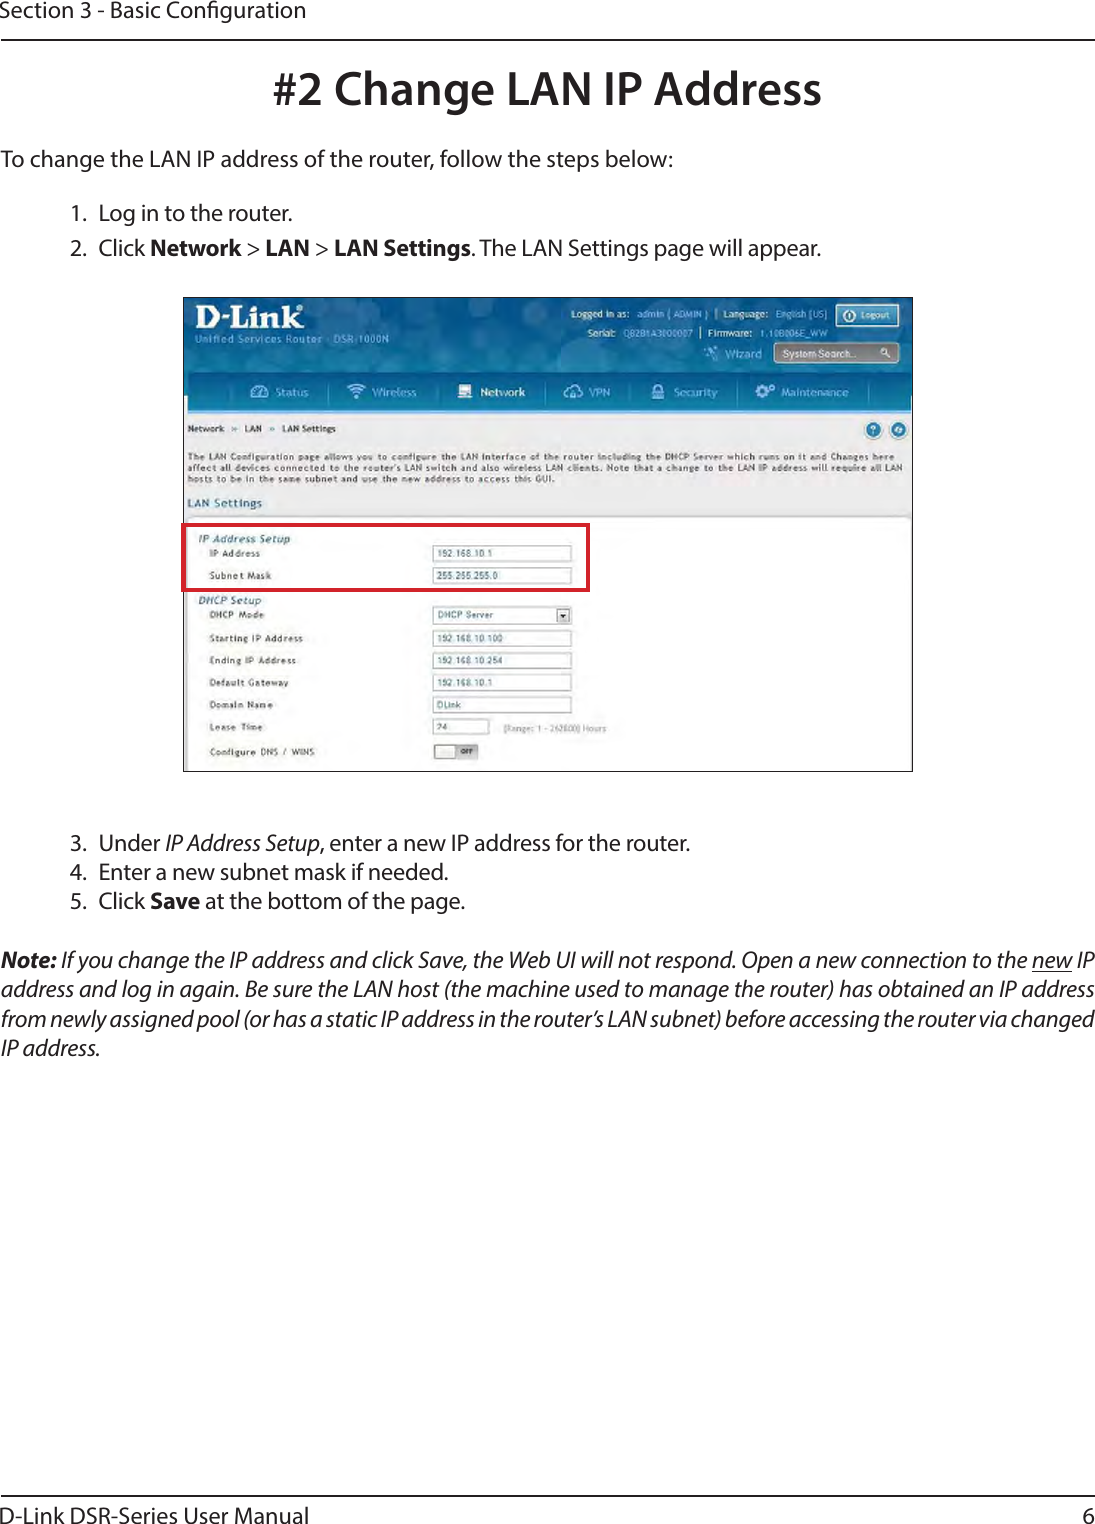 D-Link DSR-Series User Manual 6Section 3 - Basic Conguration#2 Change LAN IP Address1.  Log in to the router.2. Click Network &gt; LAN &gt; LAN Settings. The LAN Settings page will appear.To change the LAN IP address of the router, follow the steps below:Note: If you change the IP address and click Save, the Web UI will not respond. Open a new connection to the new IP address and log in again. Be sure the LAN host (the machine used to manage the router) has obtained an IP address from newly assigned pool (or has a static IP address in the router’s LAN subnet) before accessing the router via changed IP address.3. Under IP Address Setup, enter a new IP address for the router.4.  Enter a new subnet mask if needed.5. Click Save at the bottom of the page.